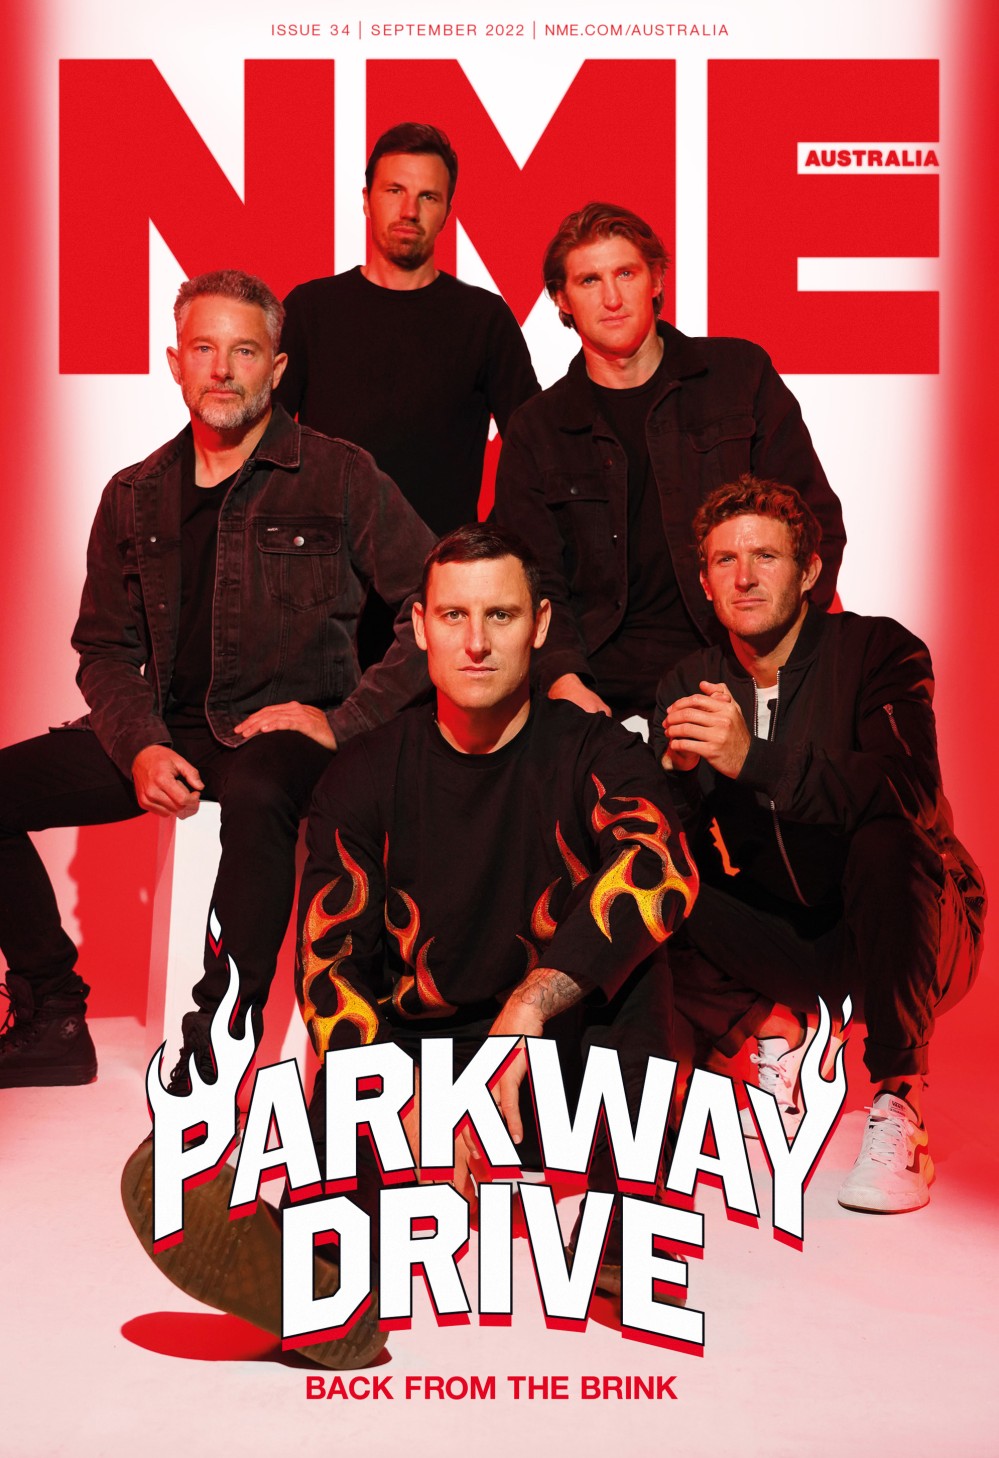 Parkway Drive on the cover of NME Australia magazine